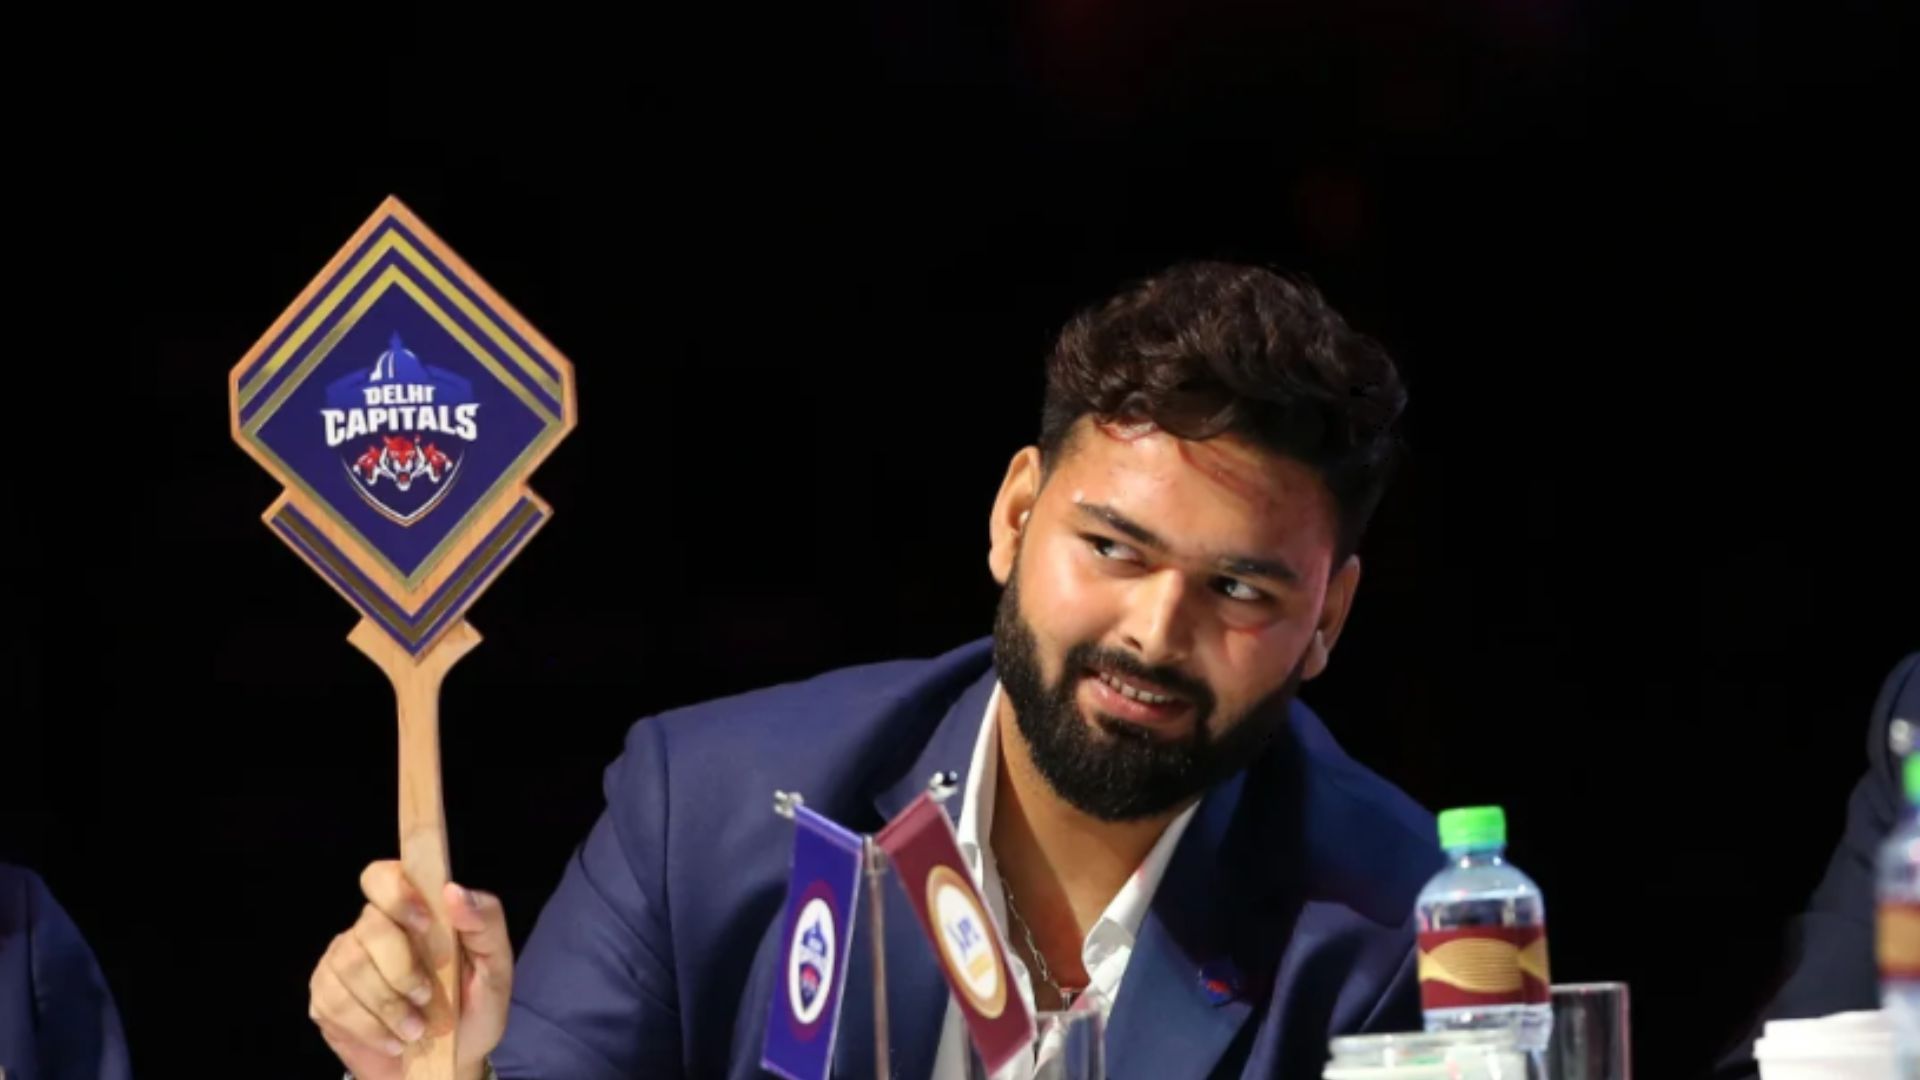 Pant was seen raising the paddle at the auction table. (Pic: BCCI)